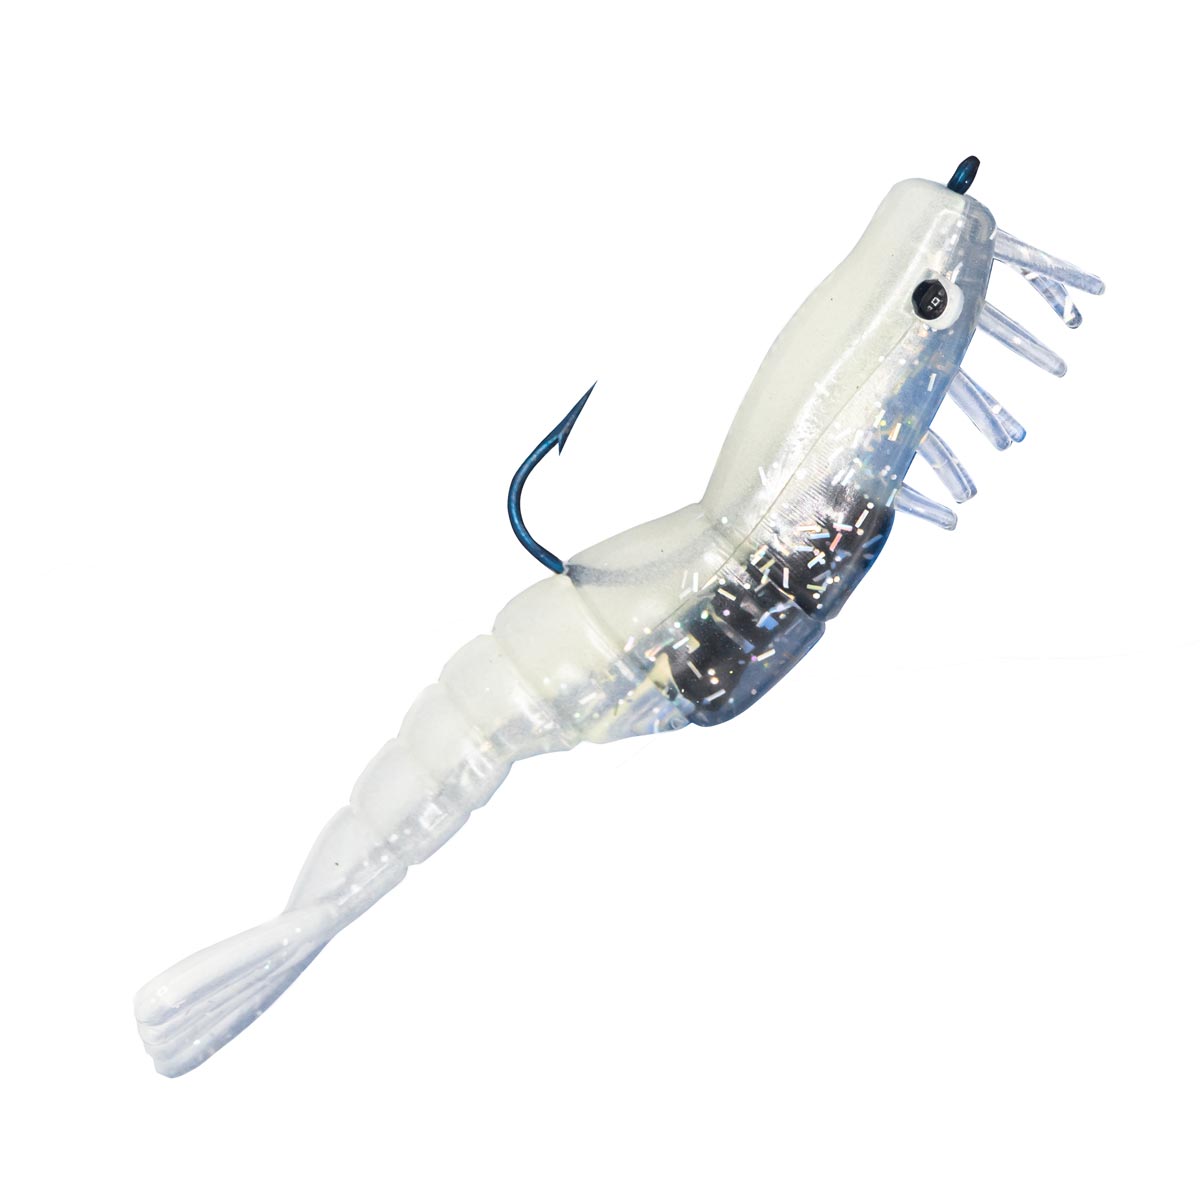 2.2g/3in. Craws Floating Shrimp Lure Soft Baits With Scent